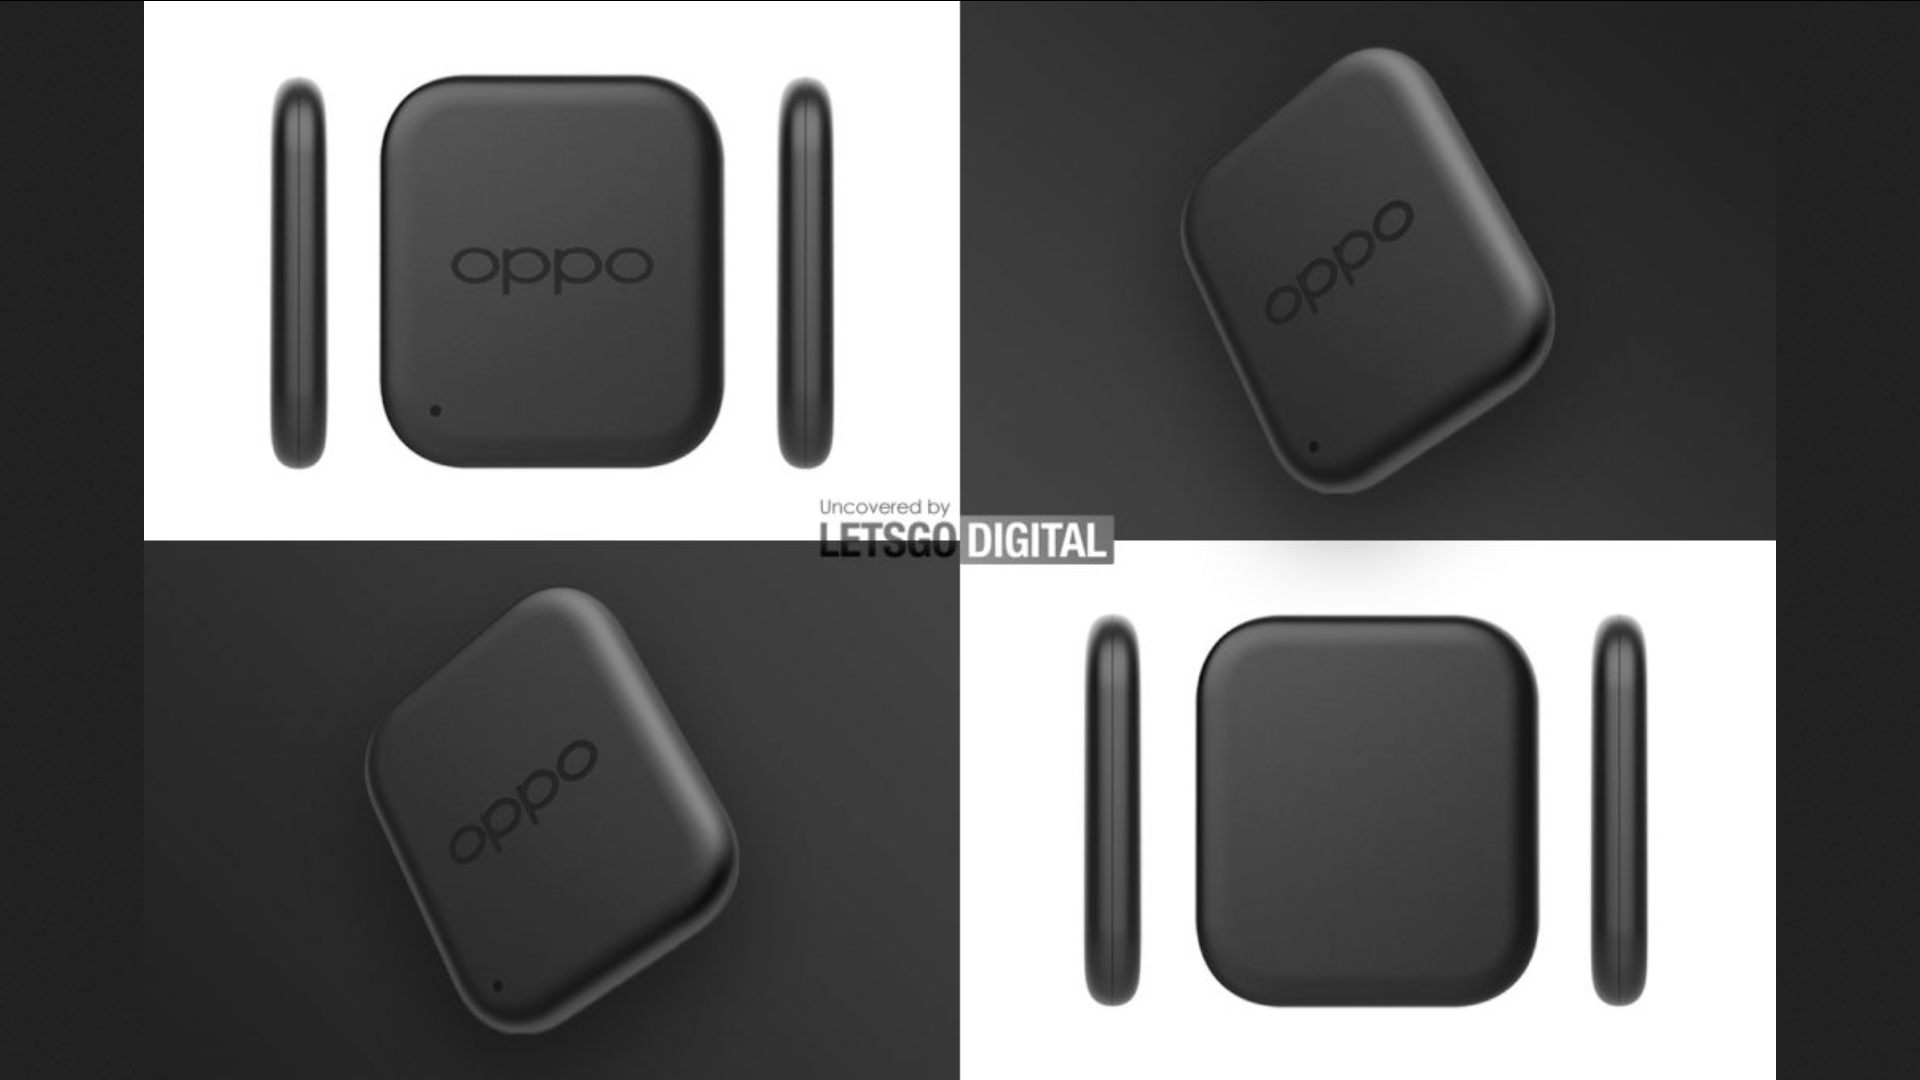 Rumour: Apple to launch new gadgets including AirTags, wireless chargi